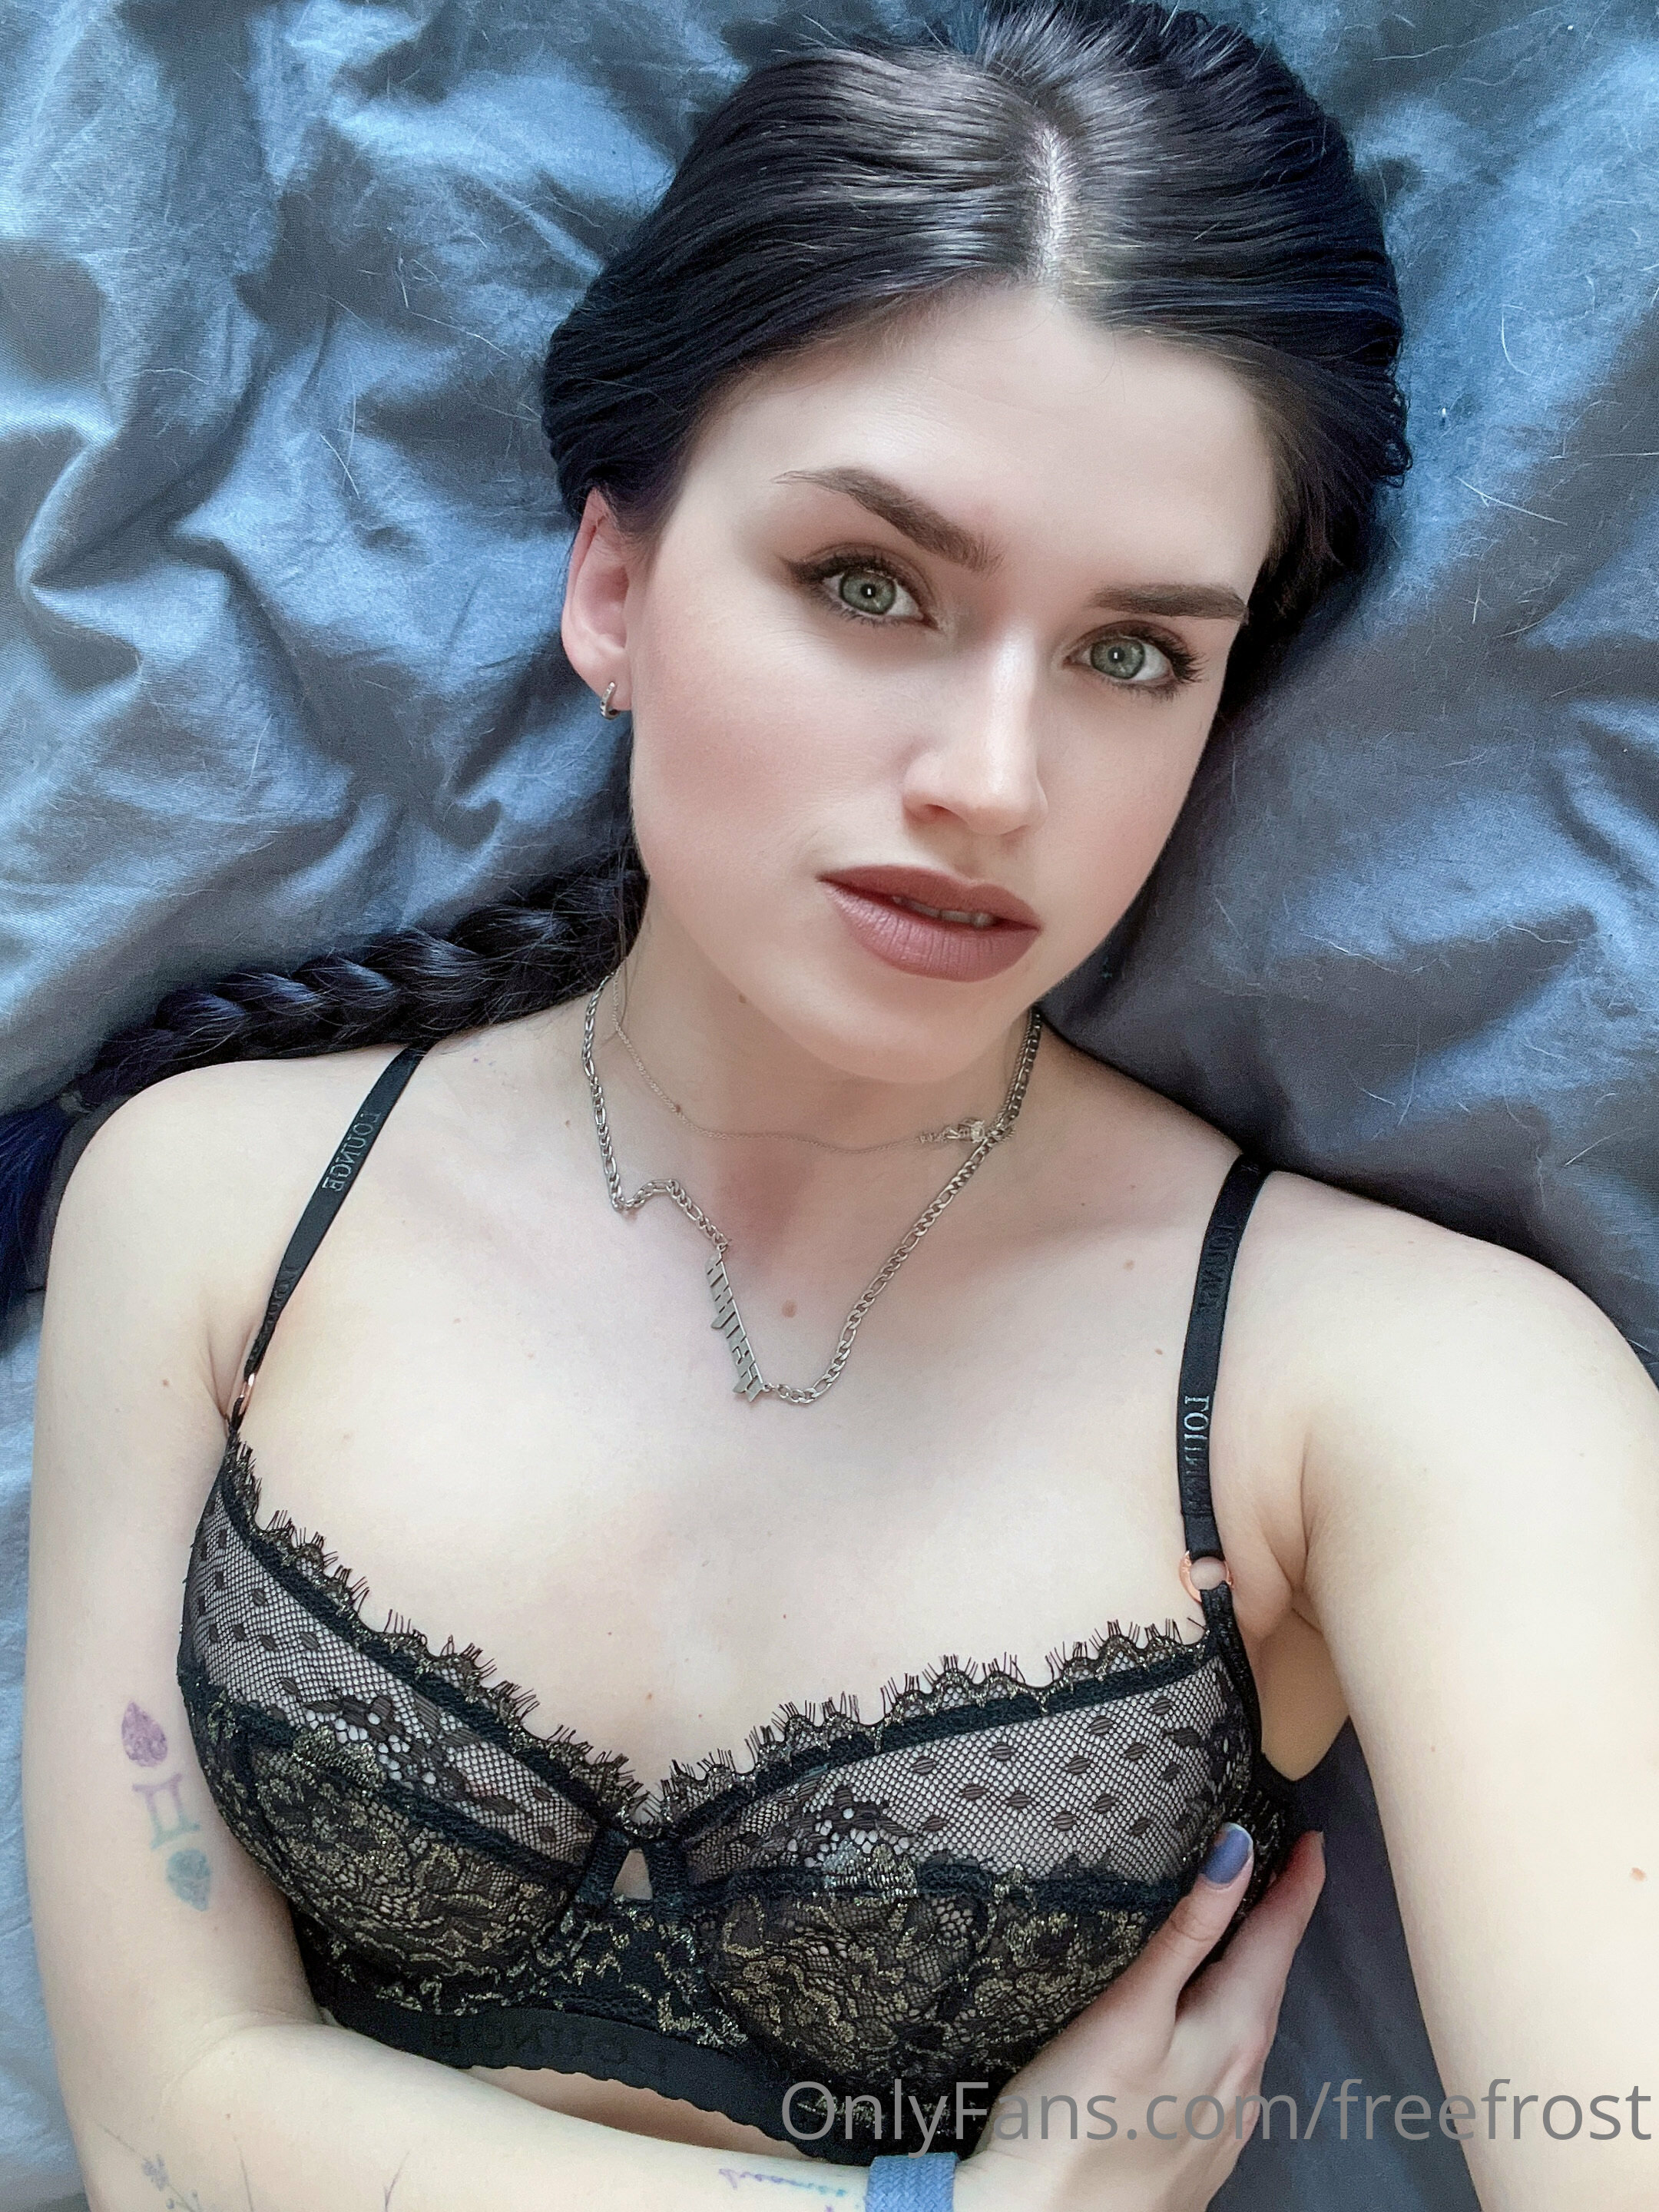 joining me by freefrost from onlyfans